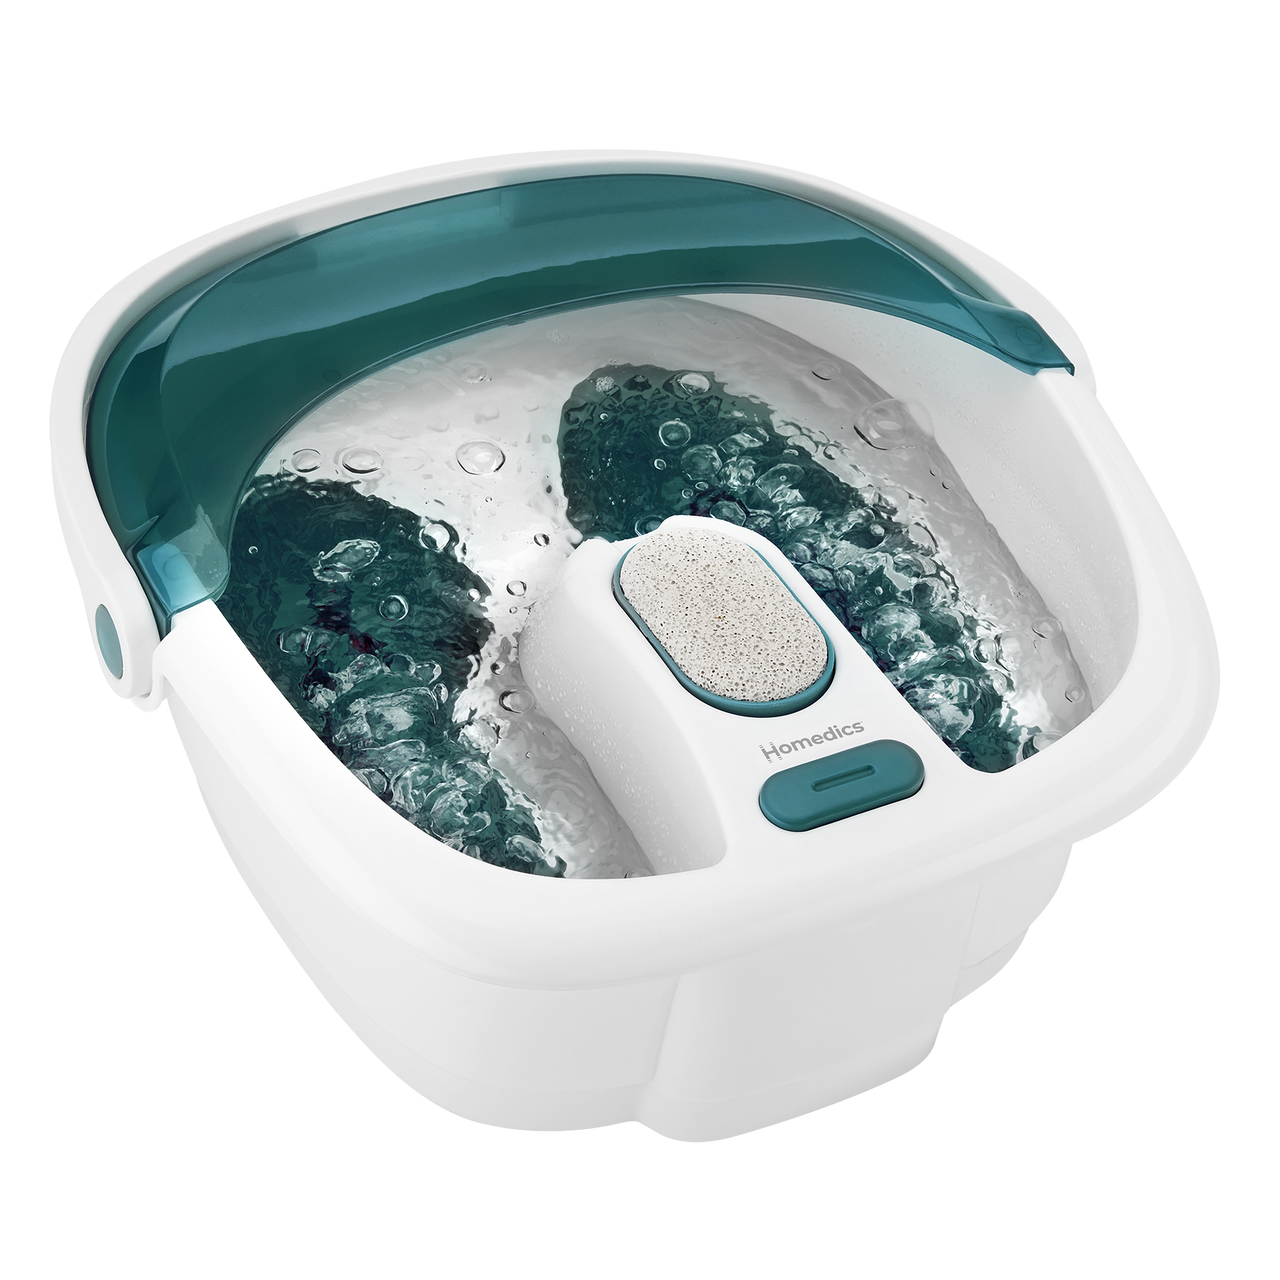 Gadgets to add that home spa touch